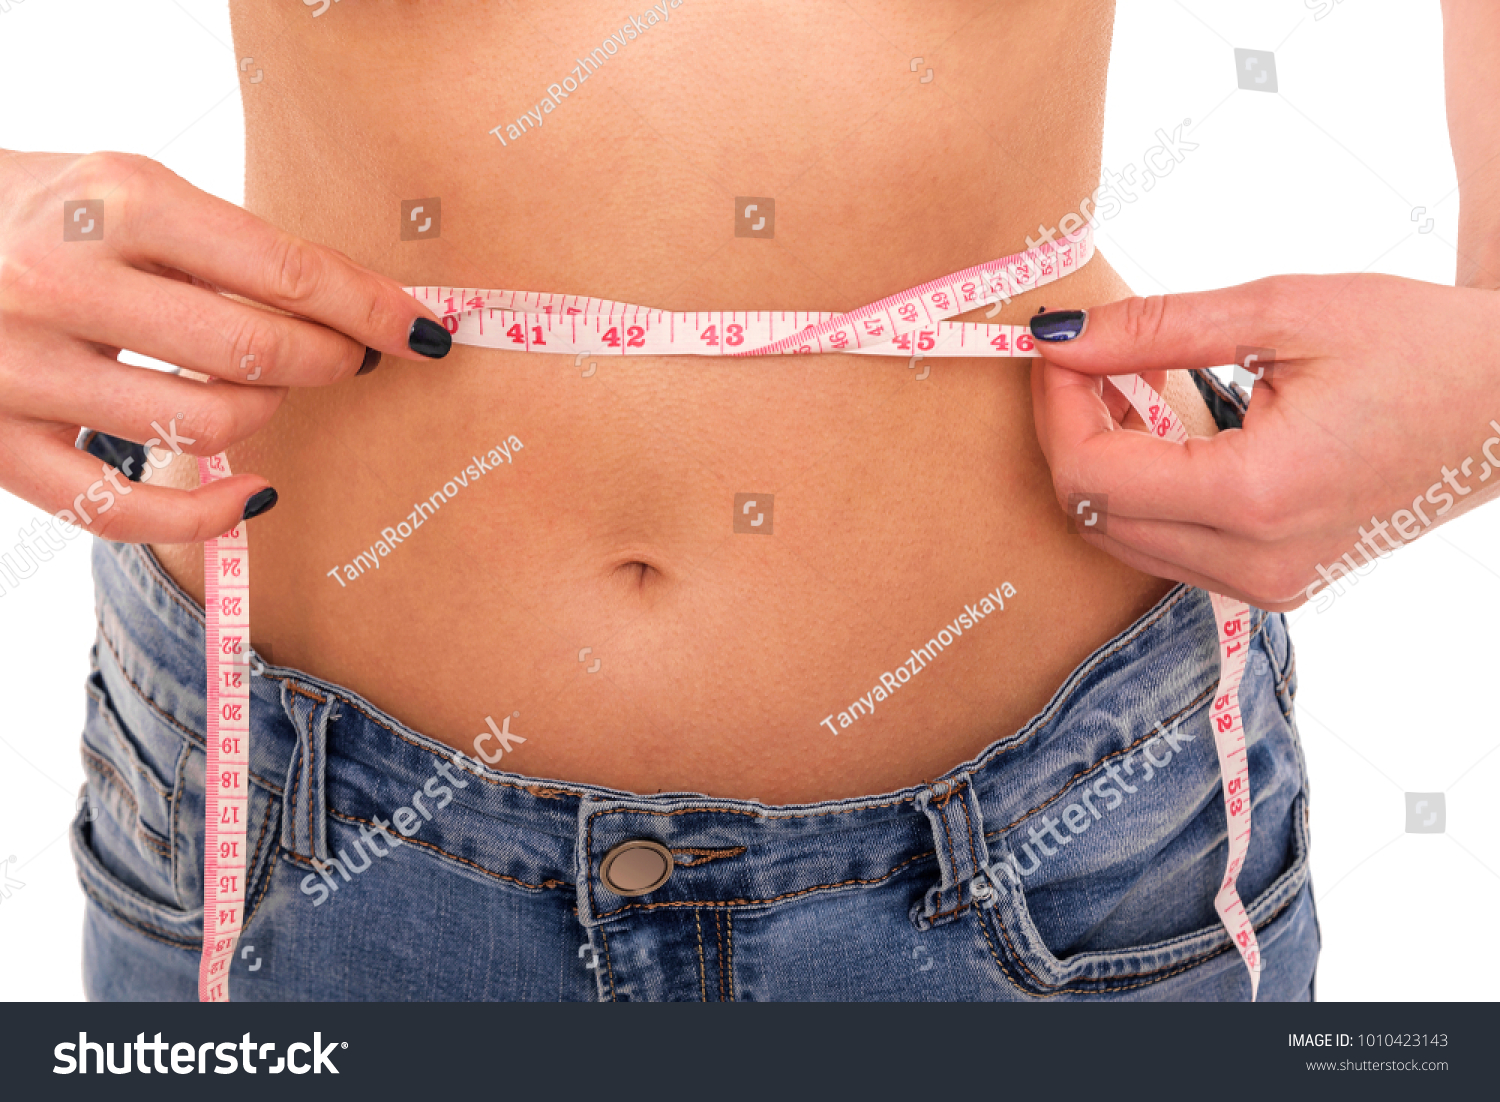 Centimeter at the waist. Measure the waist. Female silhouette on white background. #1010423143